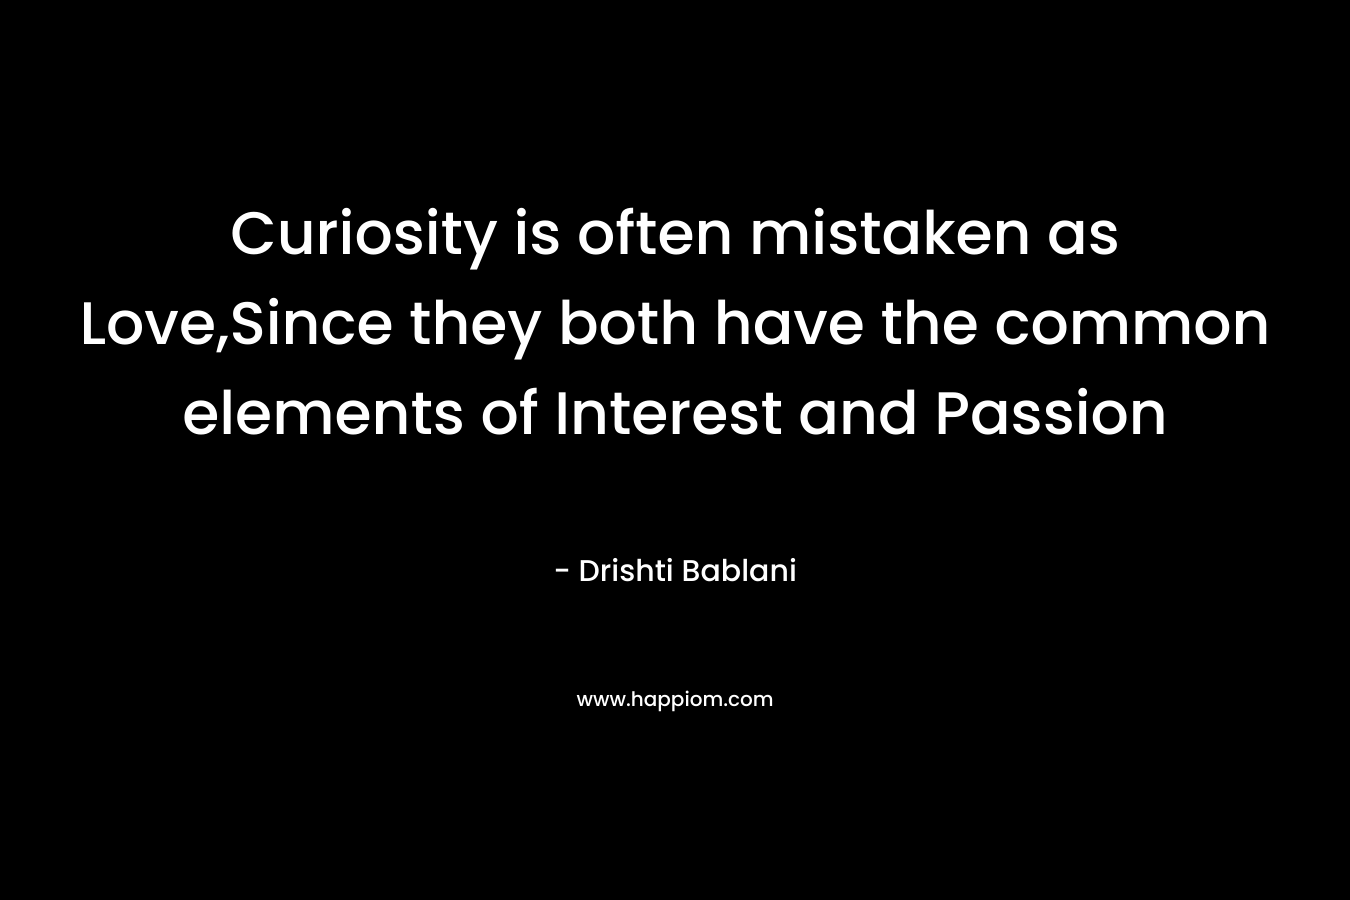 Curiosity is often mistaken as Love,Since they both have the common elements of Interest and Passion